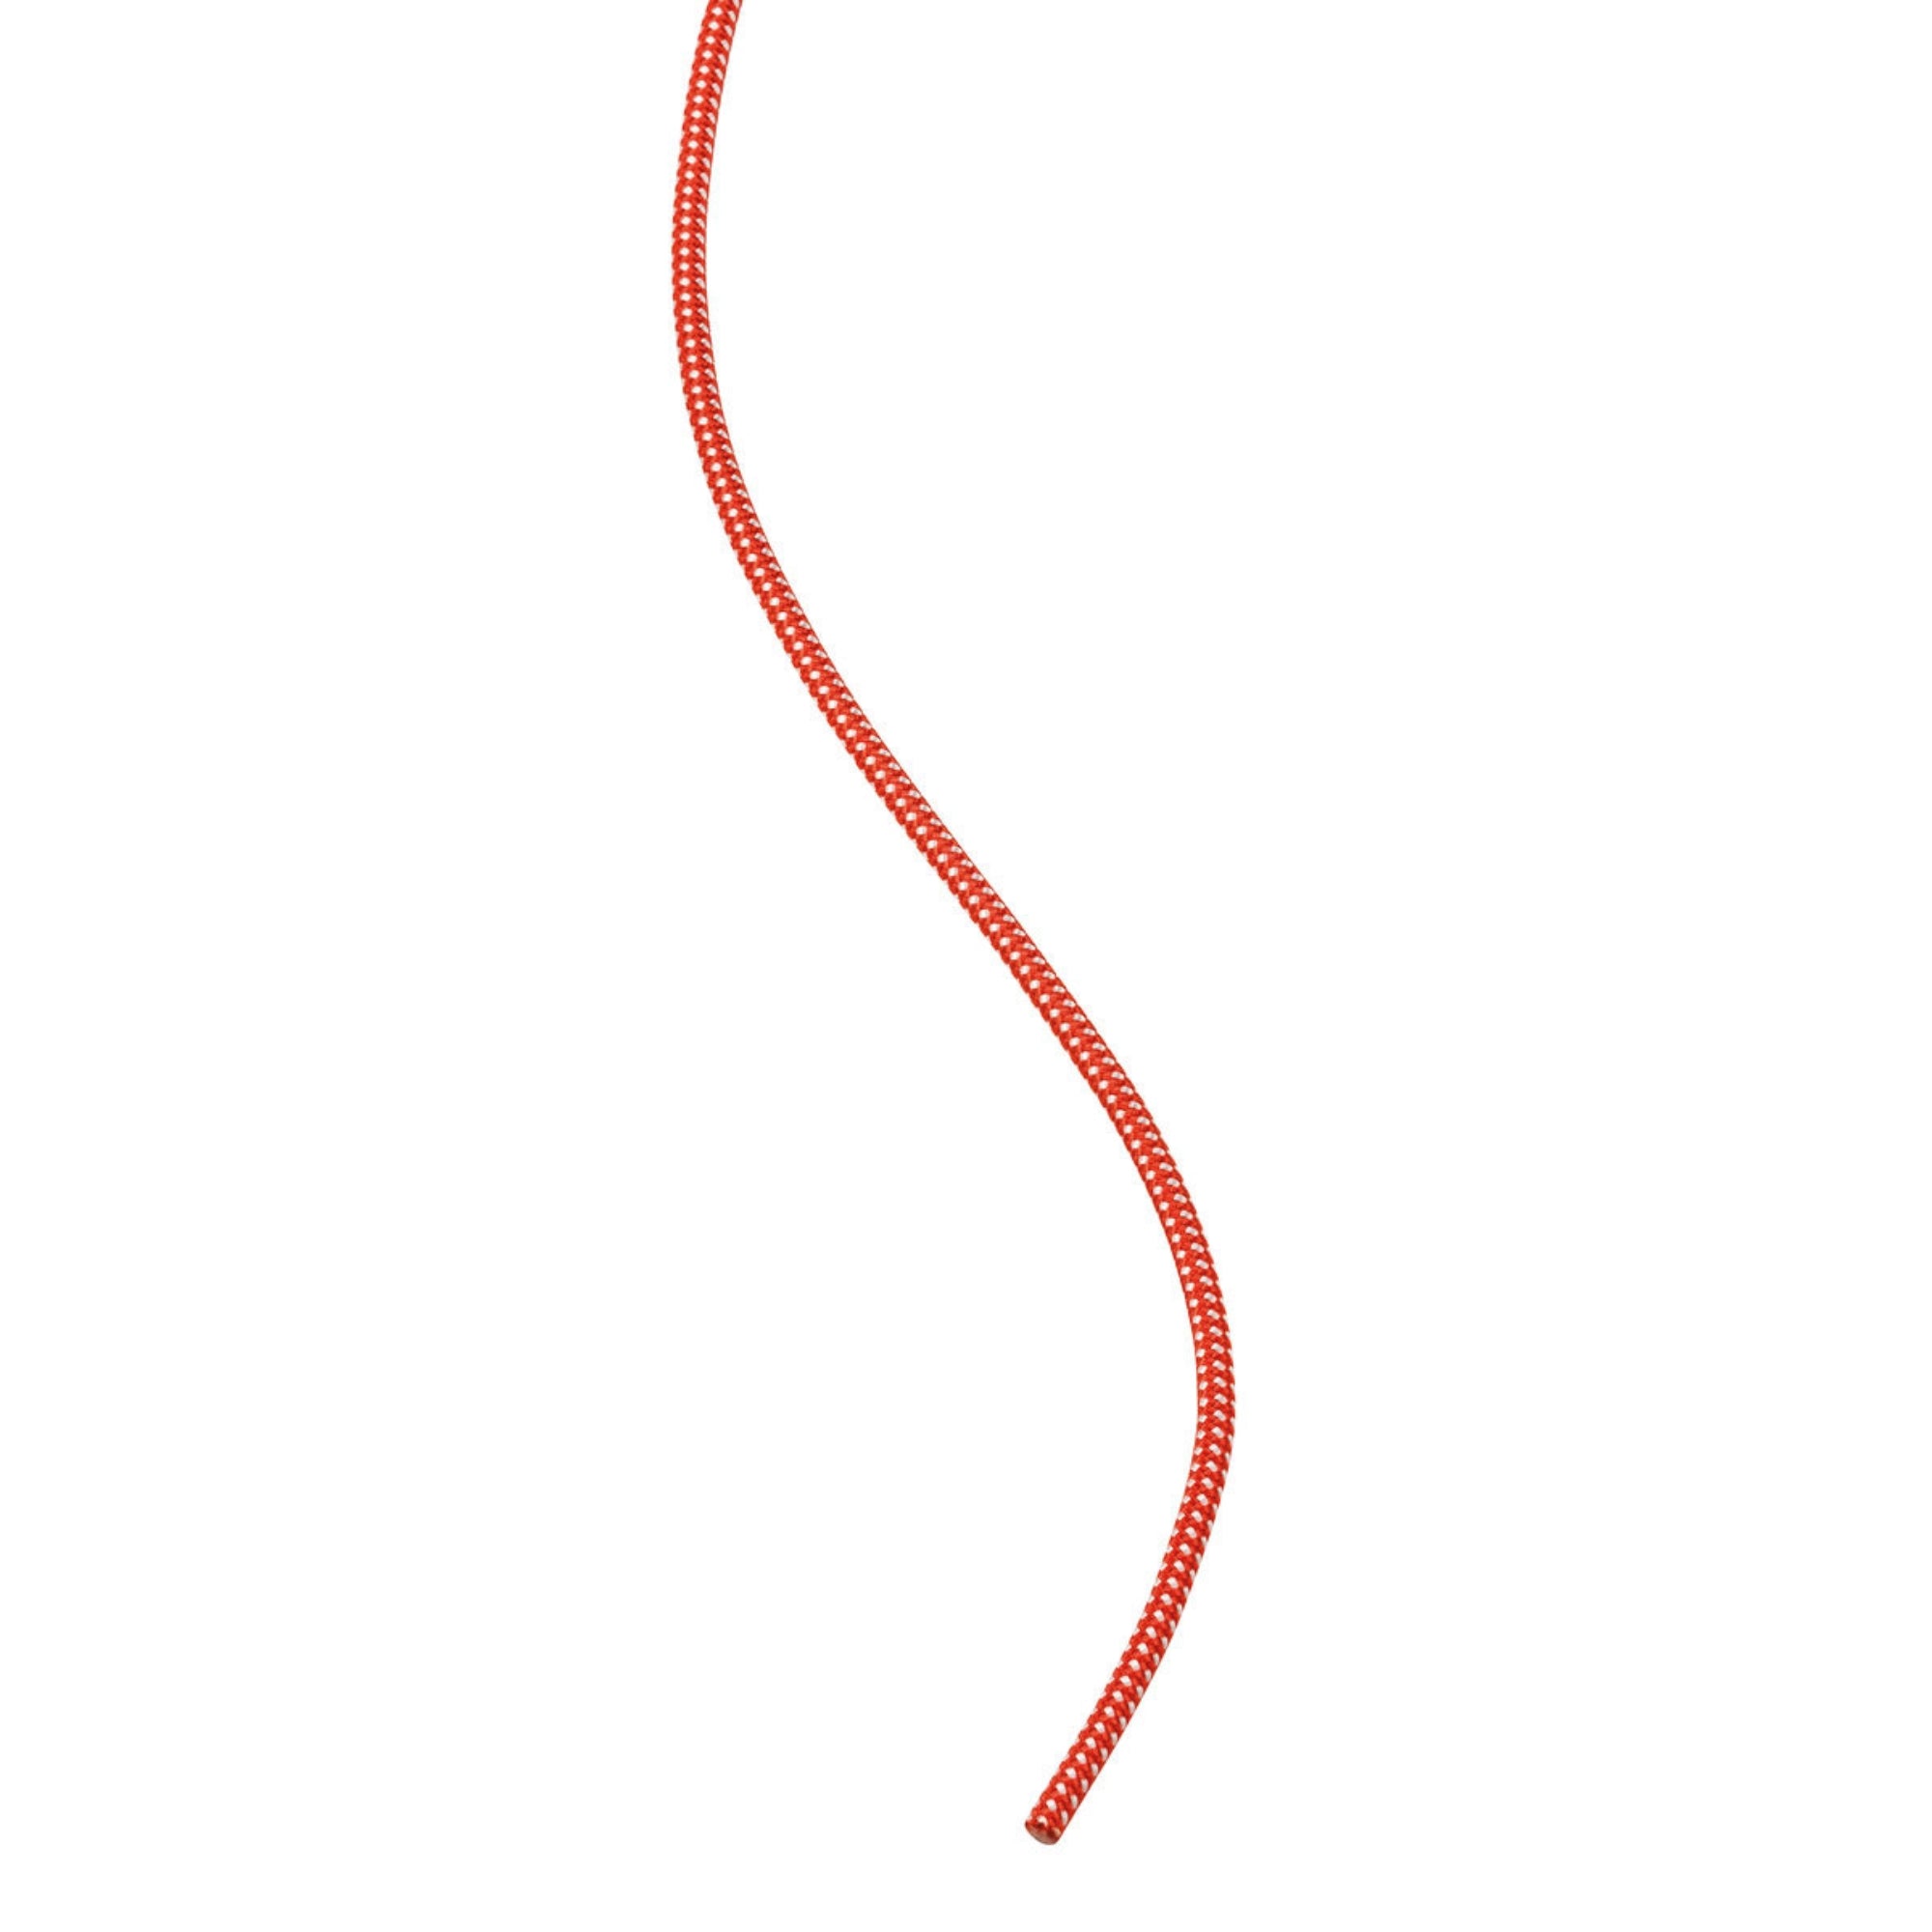 Petzl Accessory Cord 5mm Packs in red